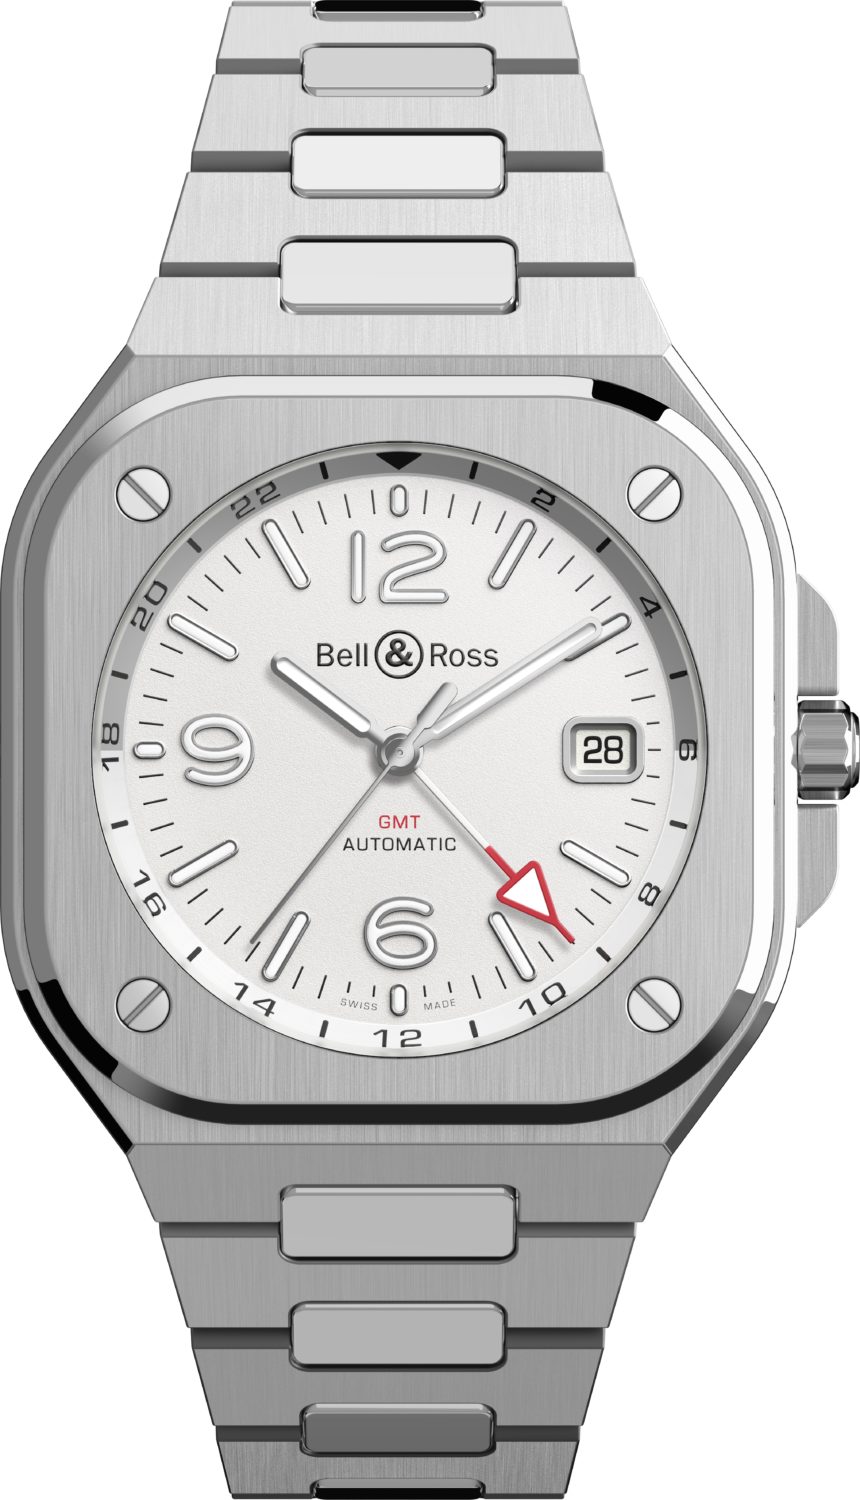 Bell & Ross Introduces the BR 05 GMT White